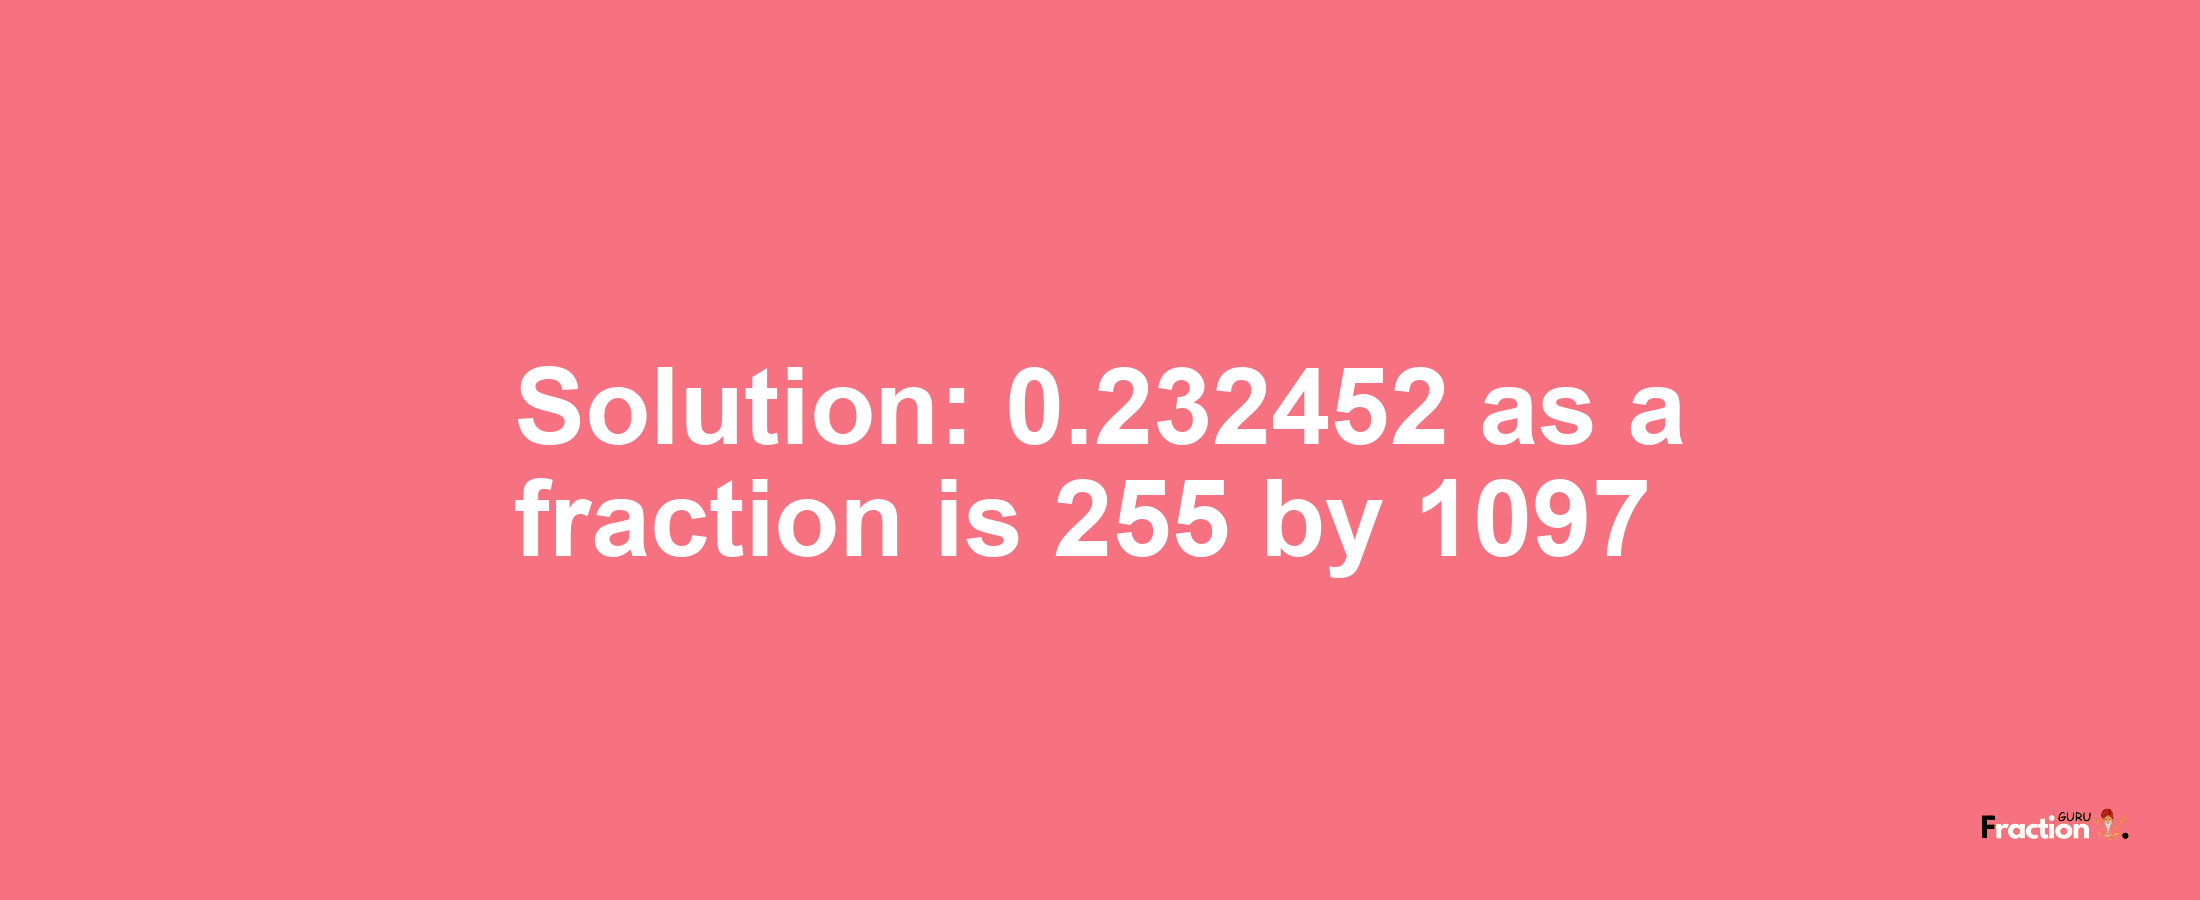 Solution:0.232452 as a fraction is 255/1097